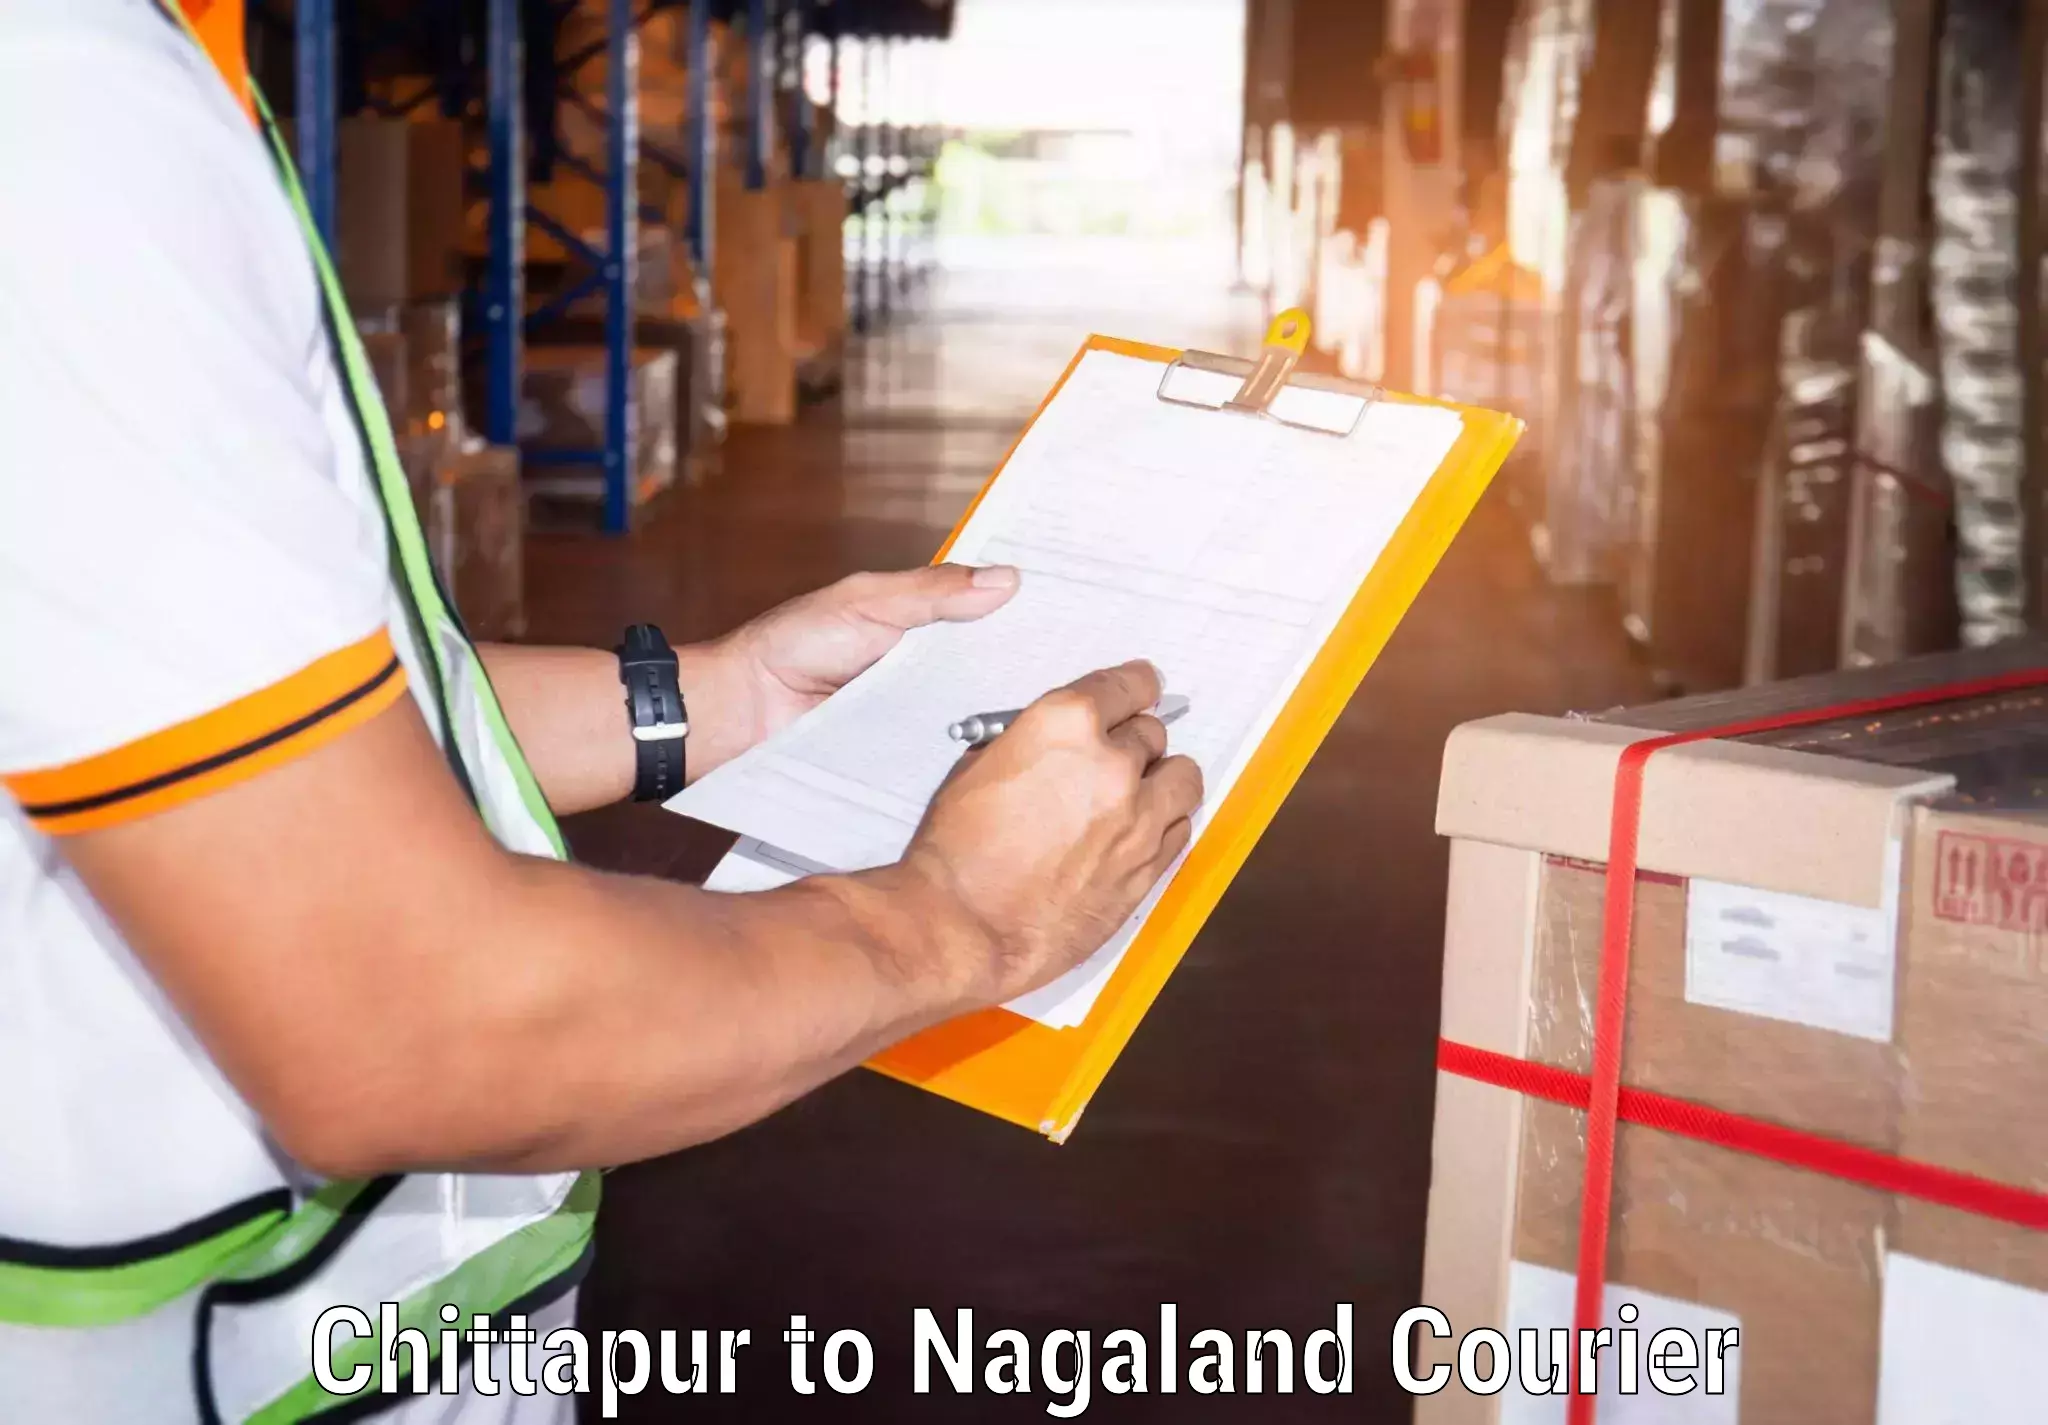 Doorstep delivery service Chittapur to Nagaland